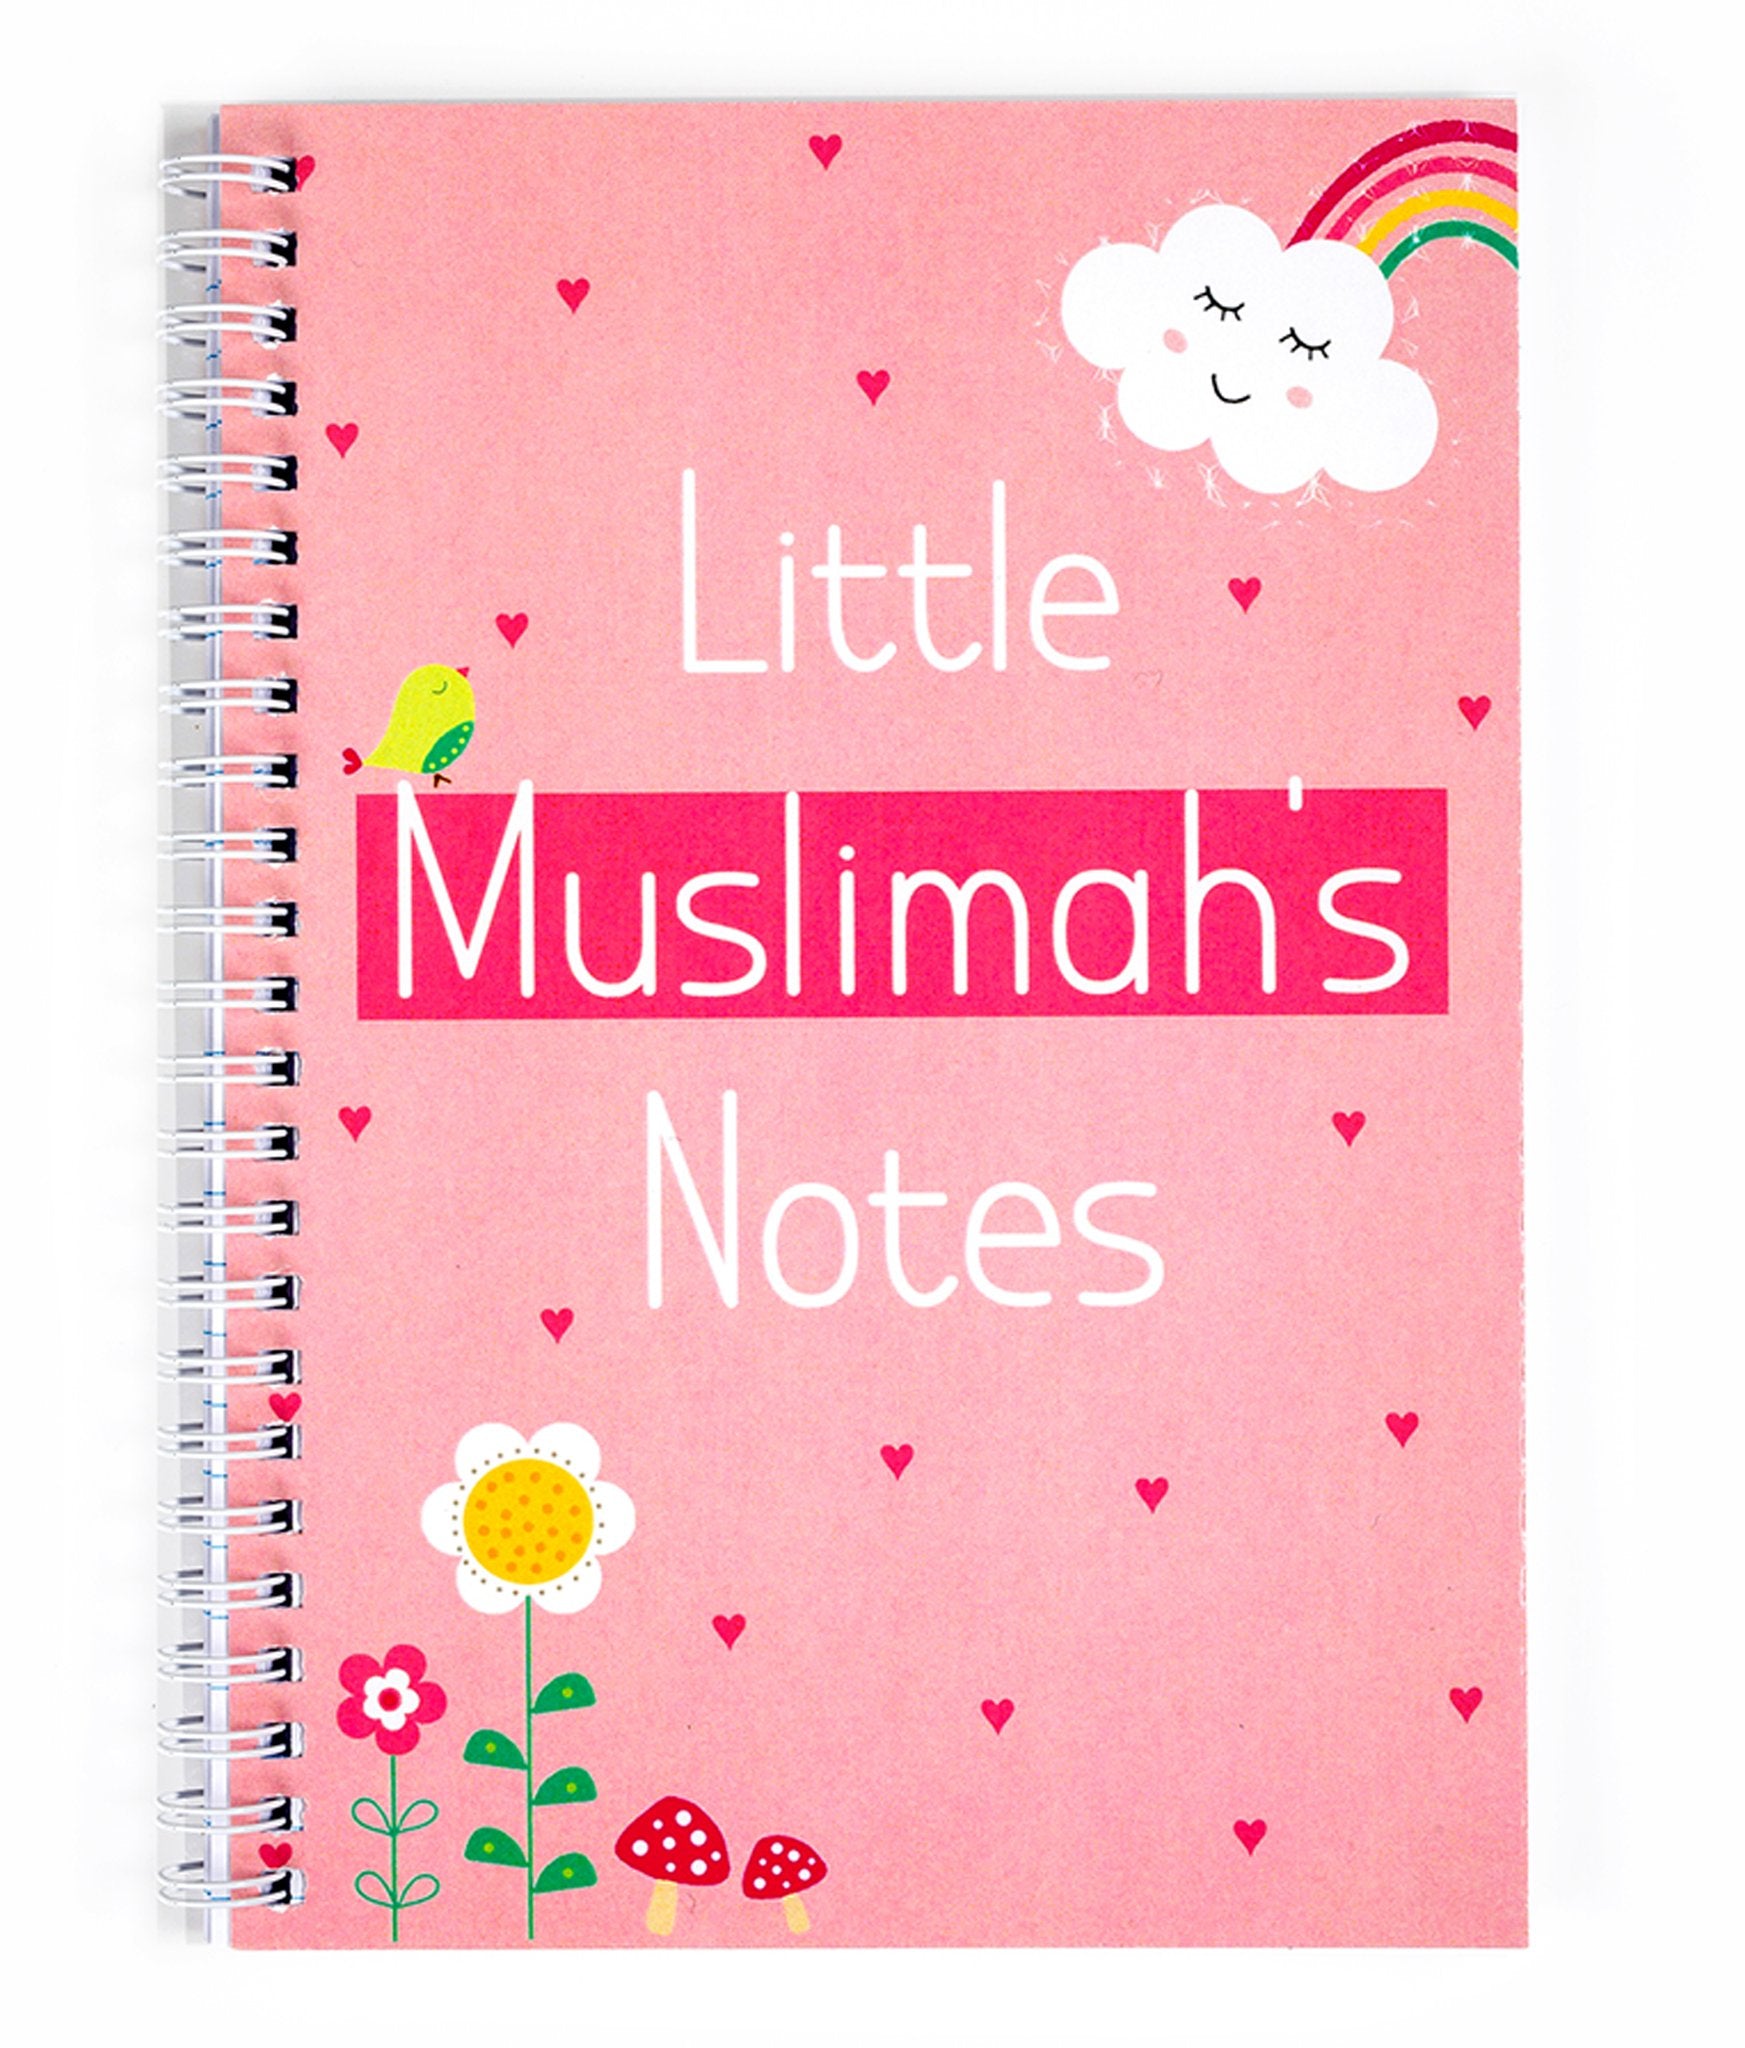 Little Muslimah's Notes